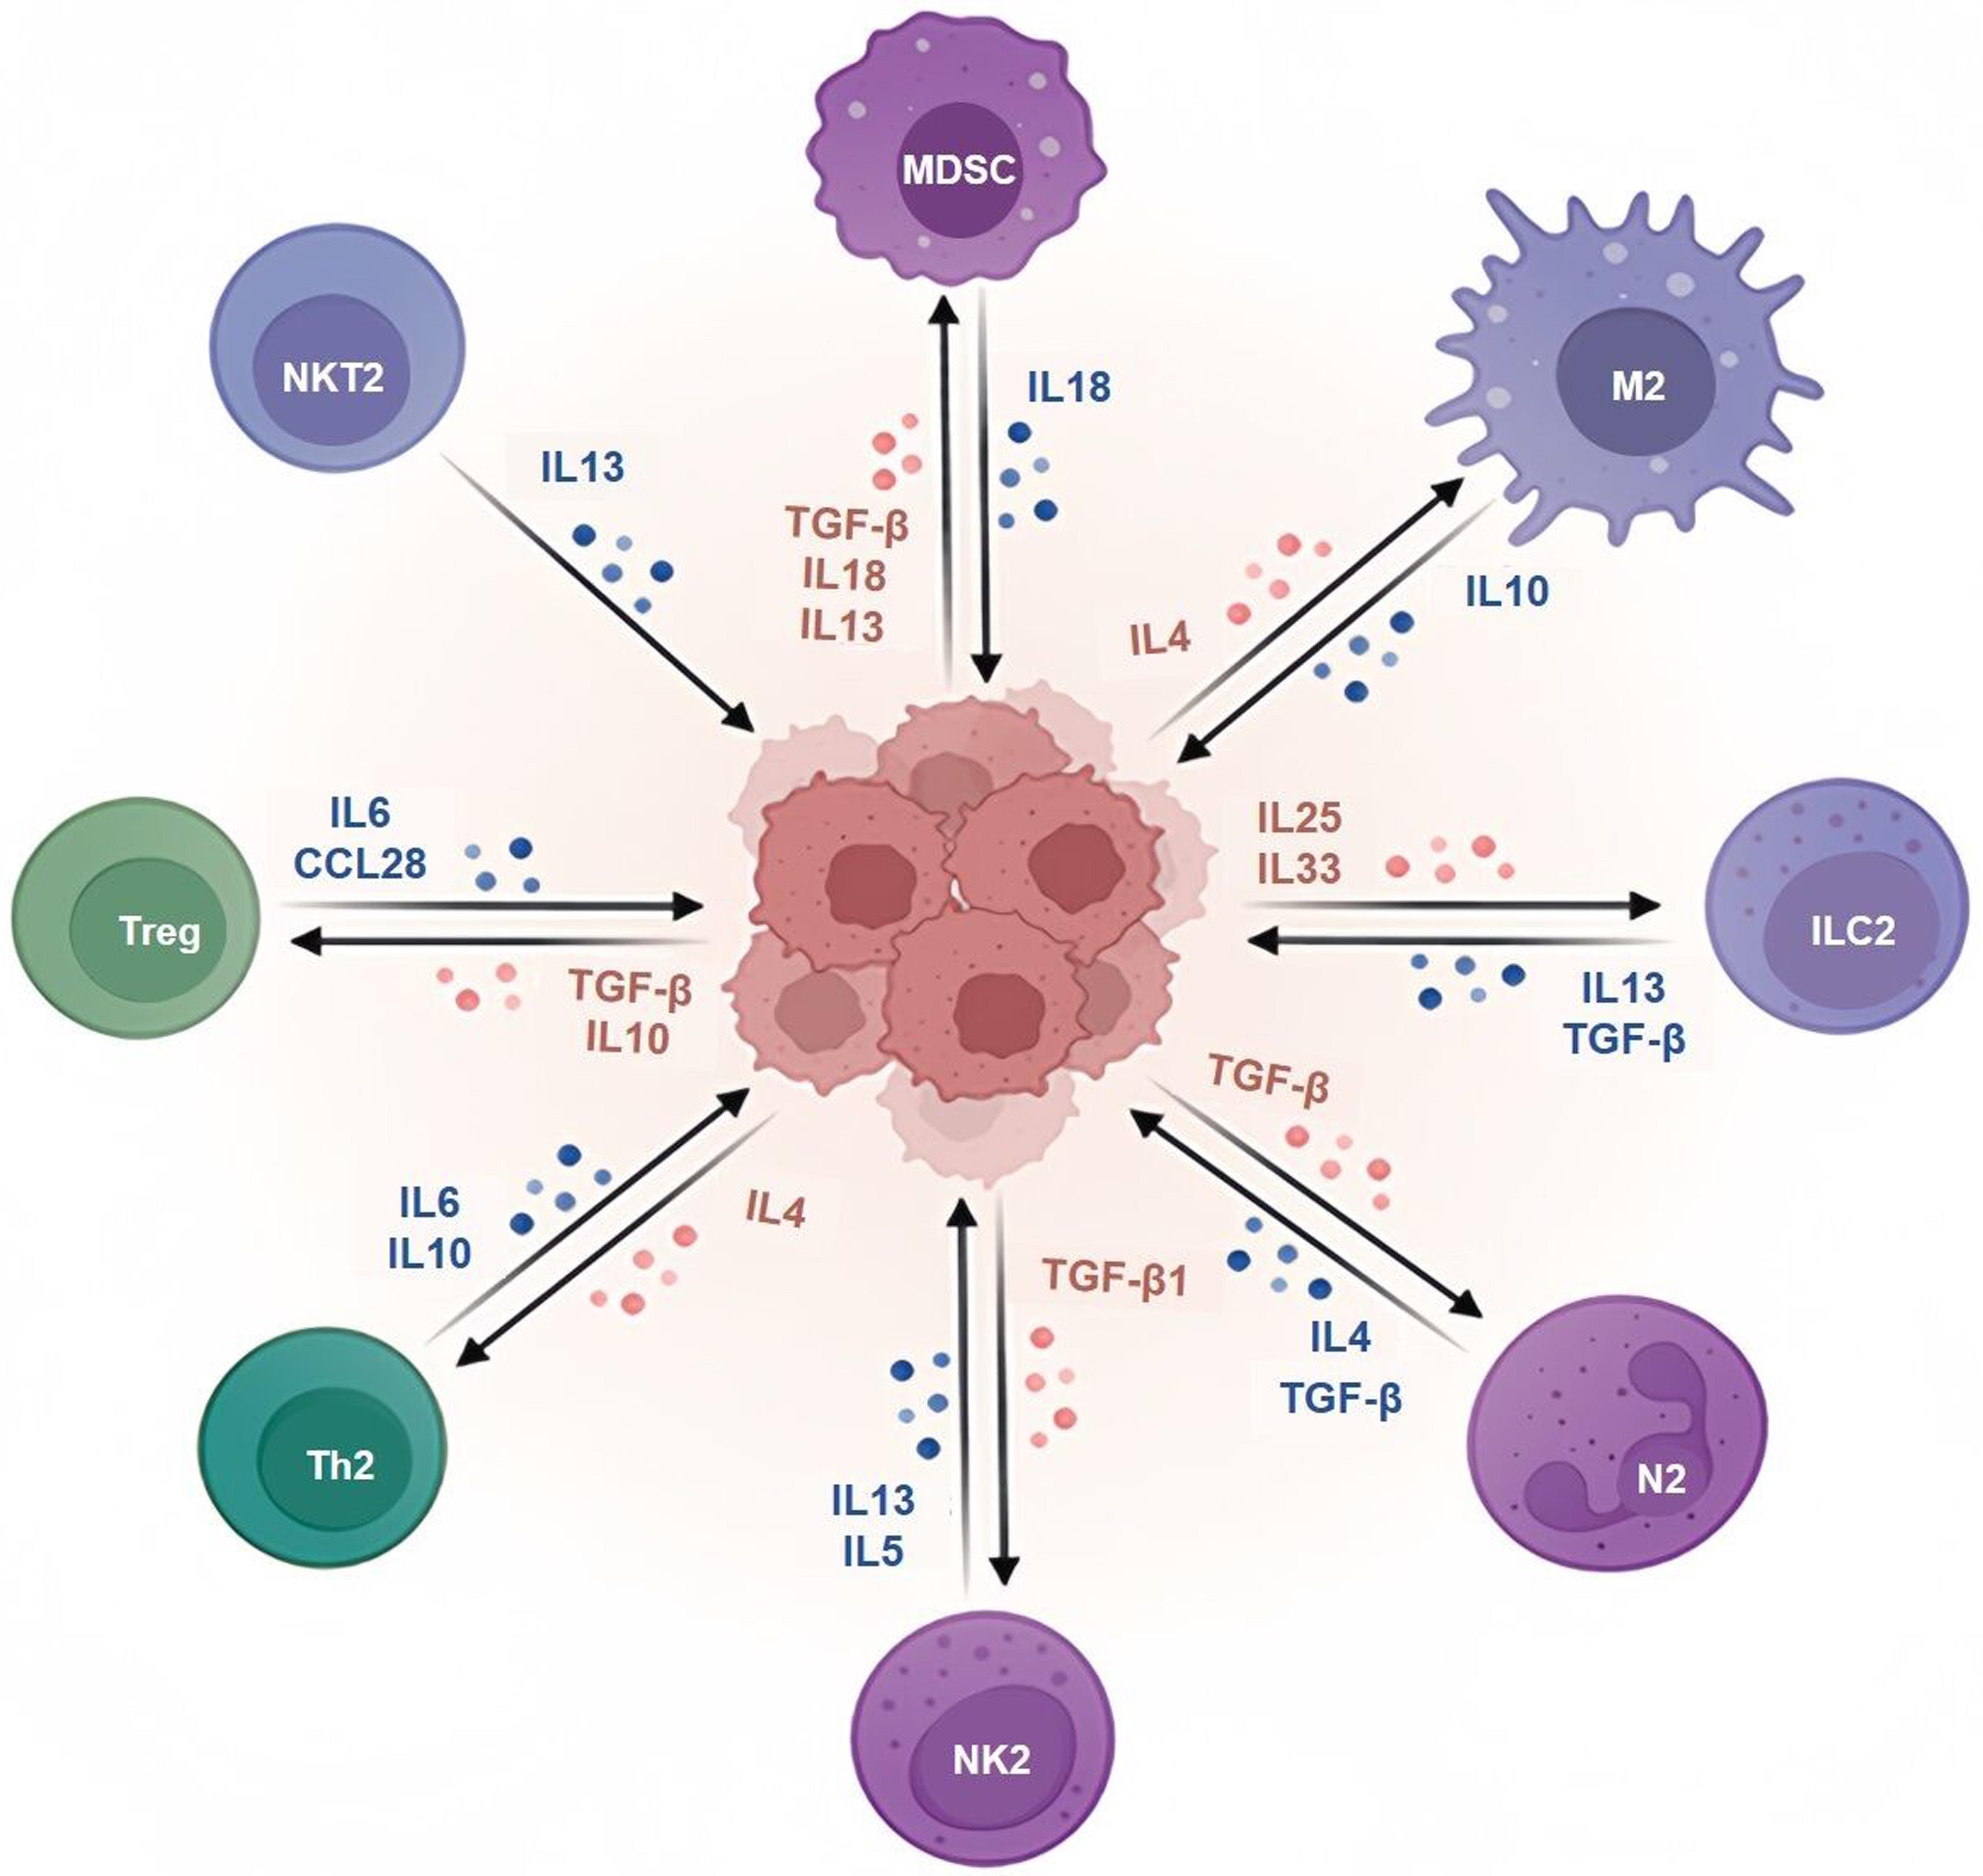 The bidirectional interactions between Hepatocellular carcinoma (HCC) tumor cells (image drawn in the center) and the immunosuppressive component including MDSCs, M2 macrophages, ILCs, N2 cells, NK2, Th2, Treg, NKT of the tumor microenvironment.